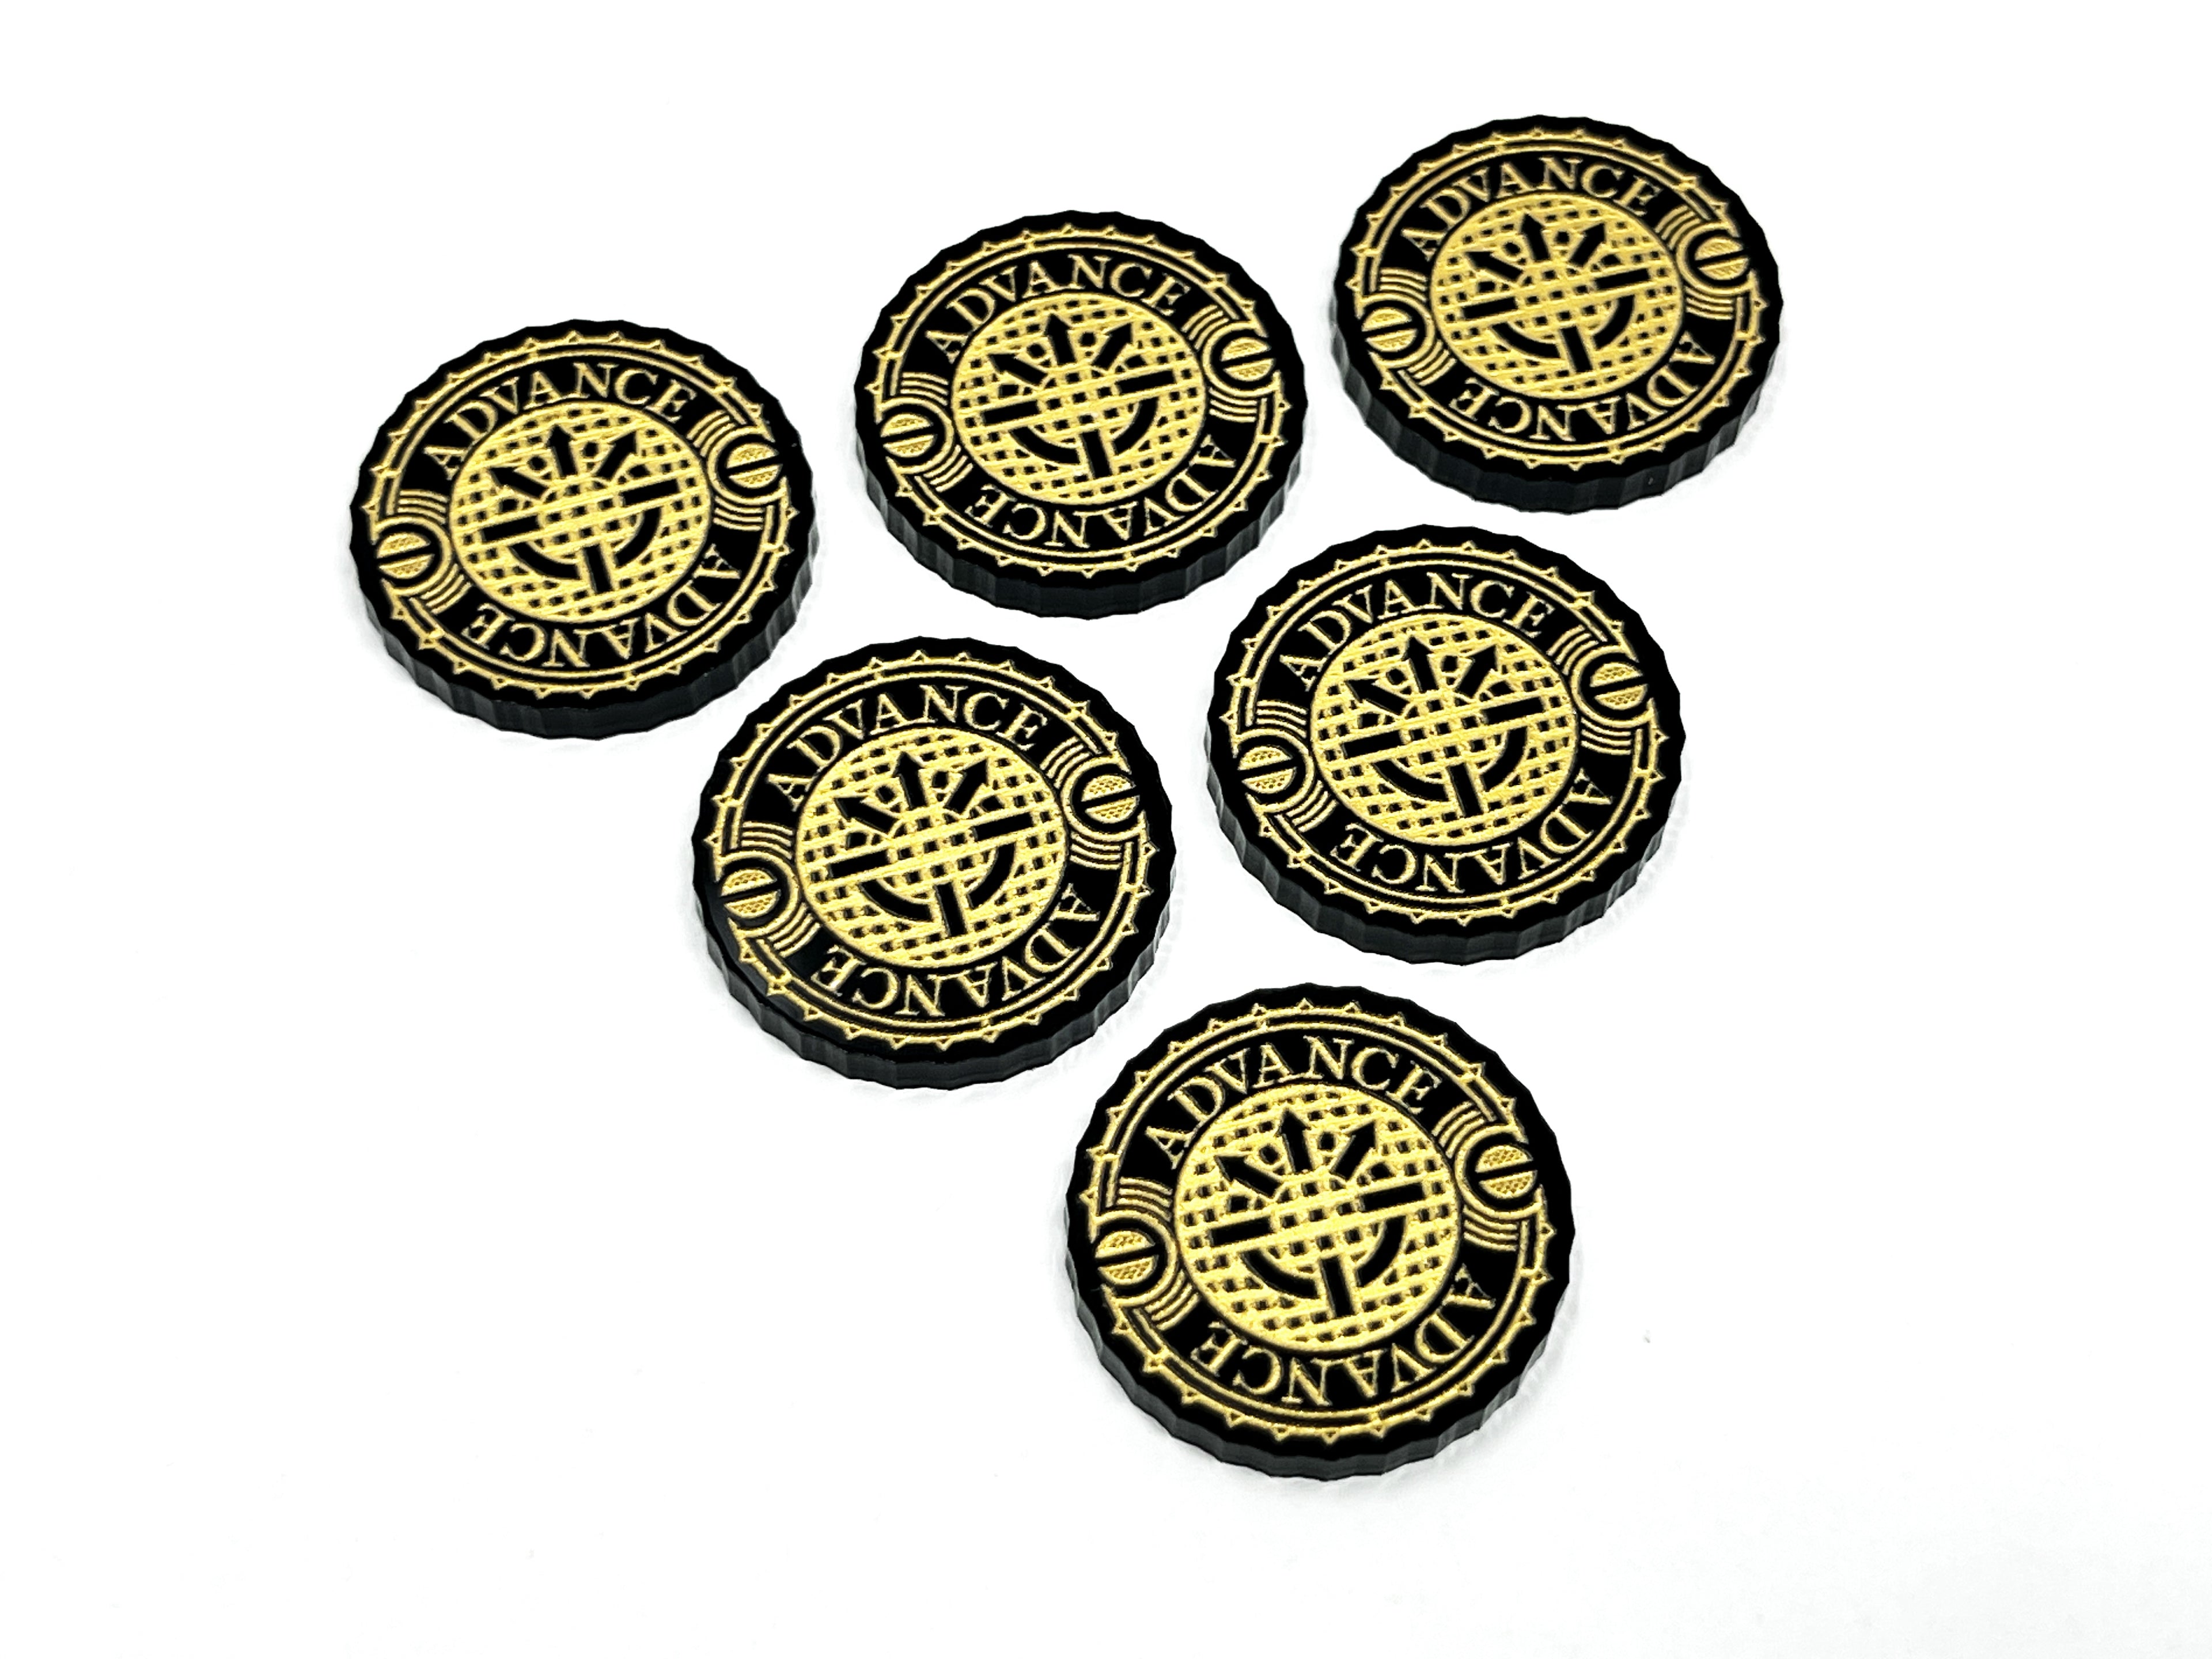 Legions Imperialis Advance Order Tokens